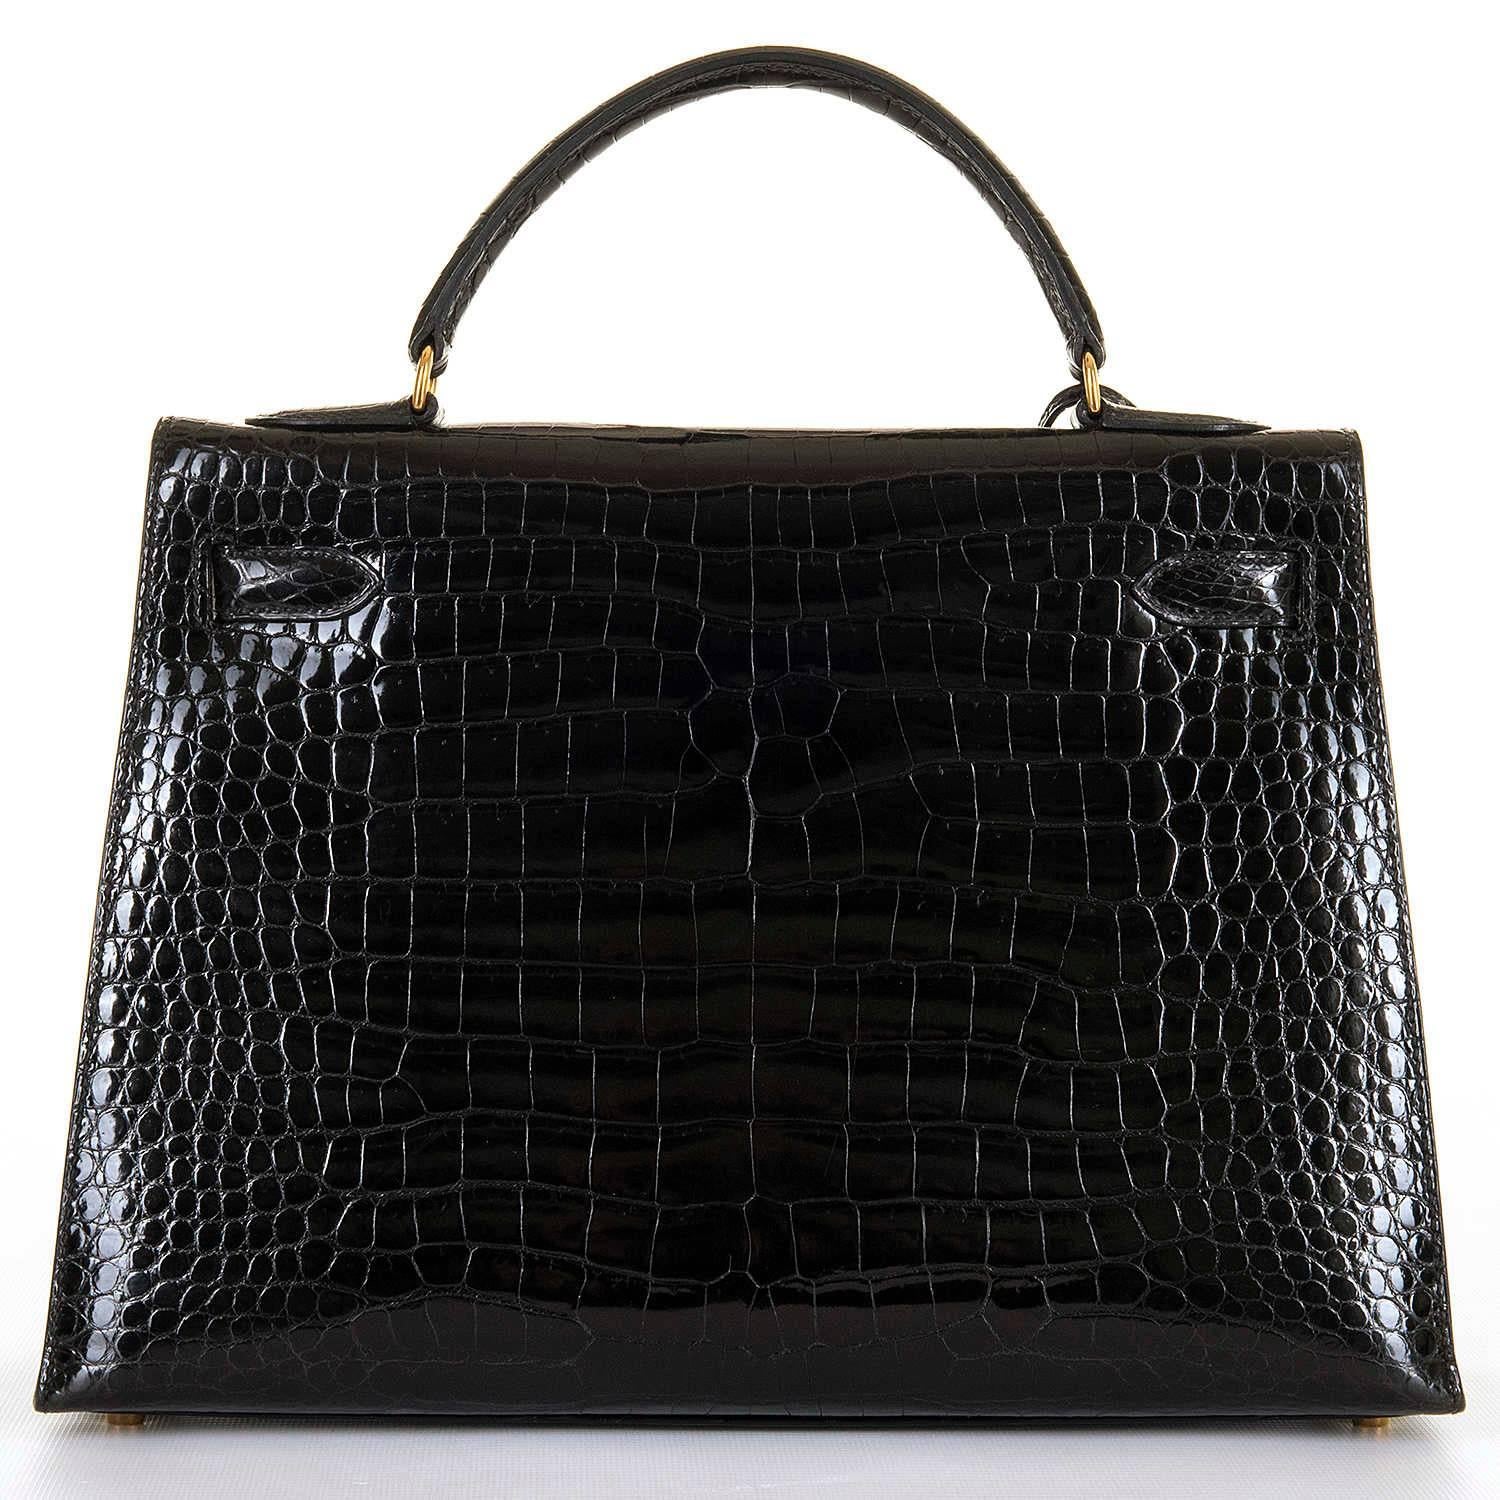 This Rare Hermes 32cm Black Crocodile Kelly Bag with Goldtone Hardware is in 'As New', pristine condition throughout.The interior is finish in Black Chèvre leather and has a full length zipped pocket, with open pockets to the other side. Fitted